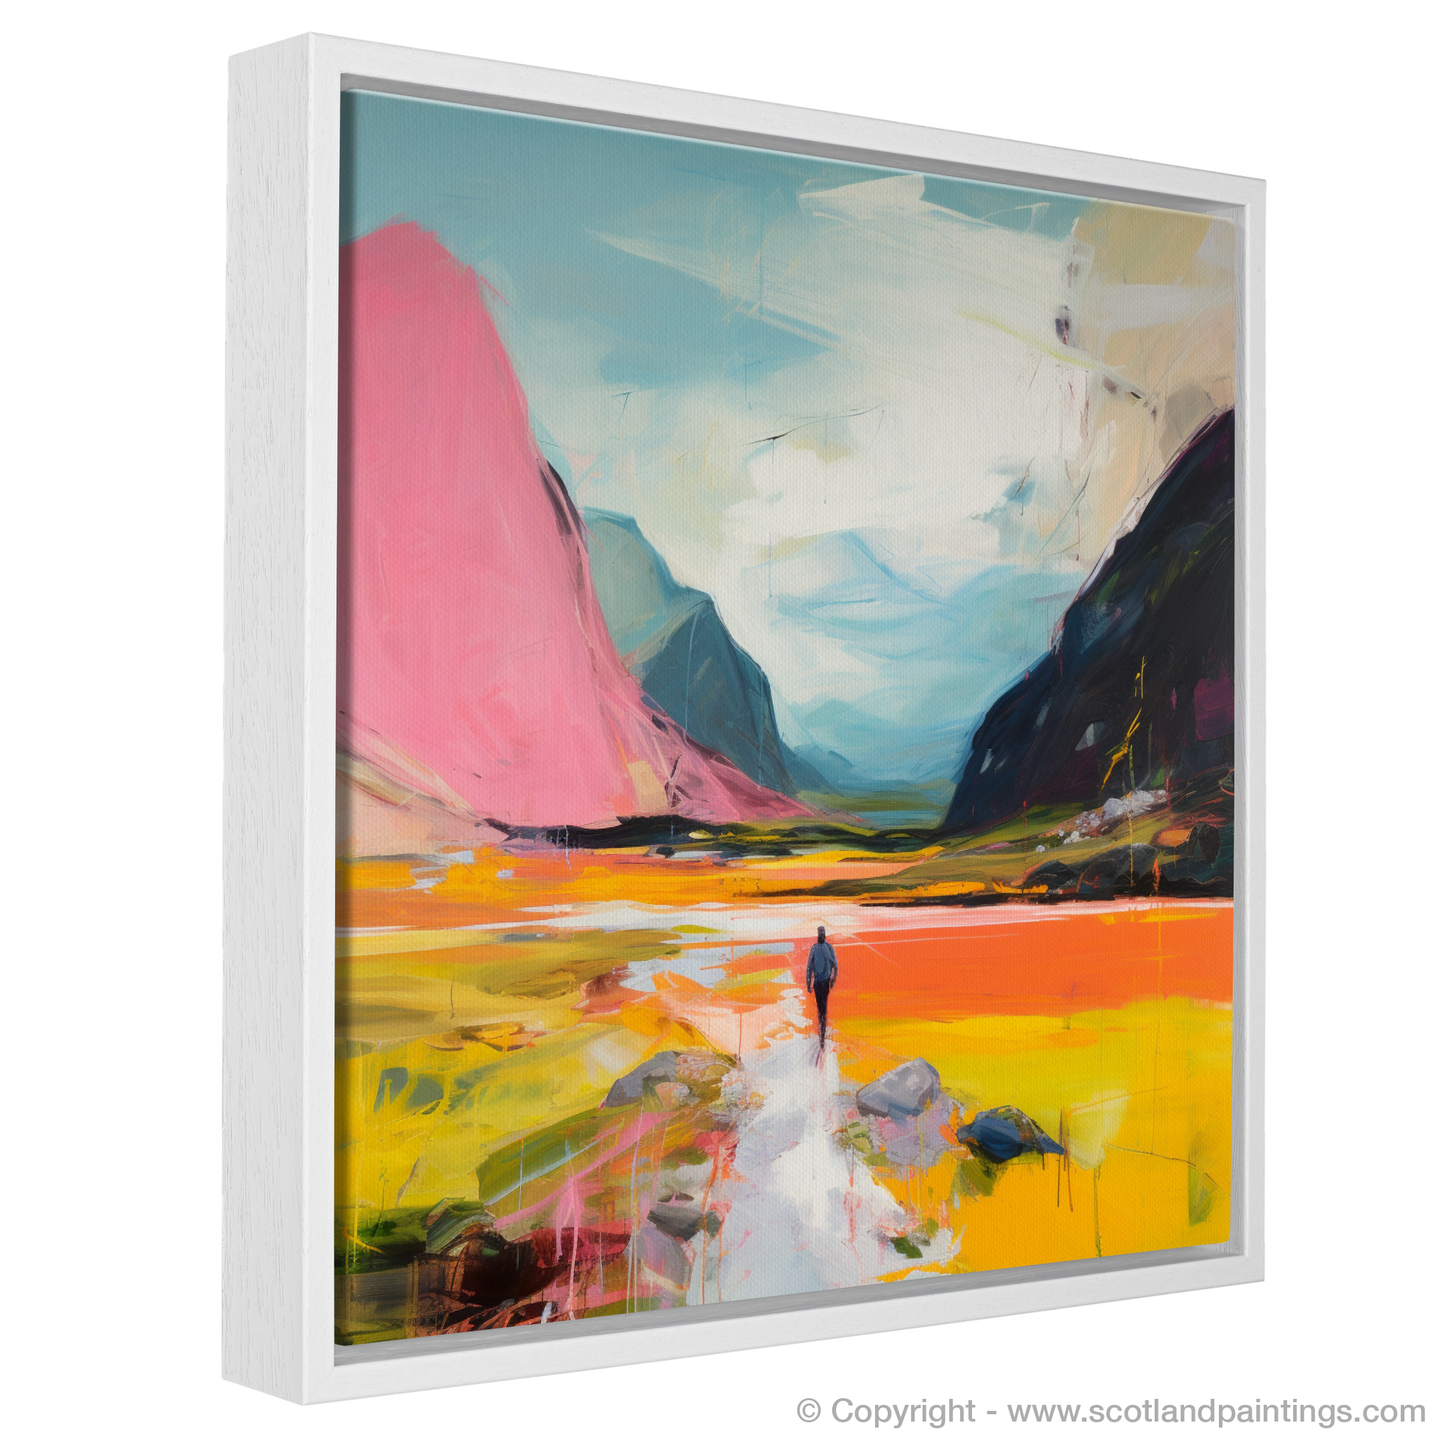 Painting and Art Print of Lone hiker in Glencoe during summer entitled "Lone Hiker's Summer Solitude in Glencoe".